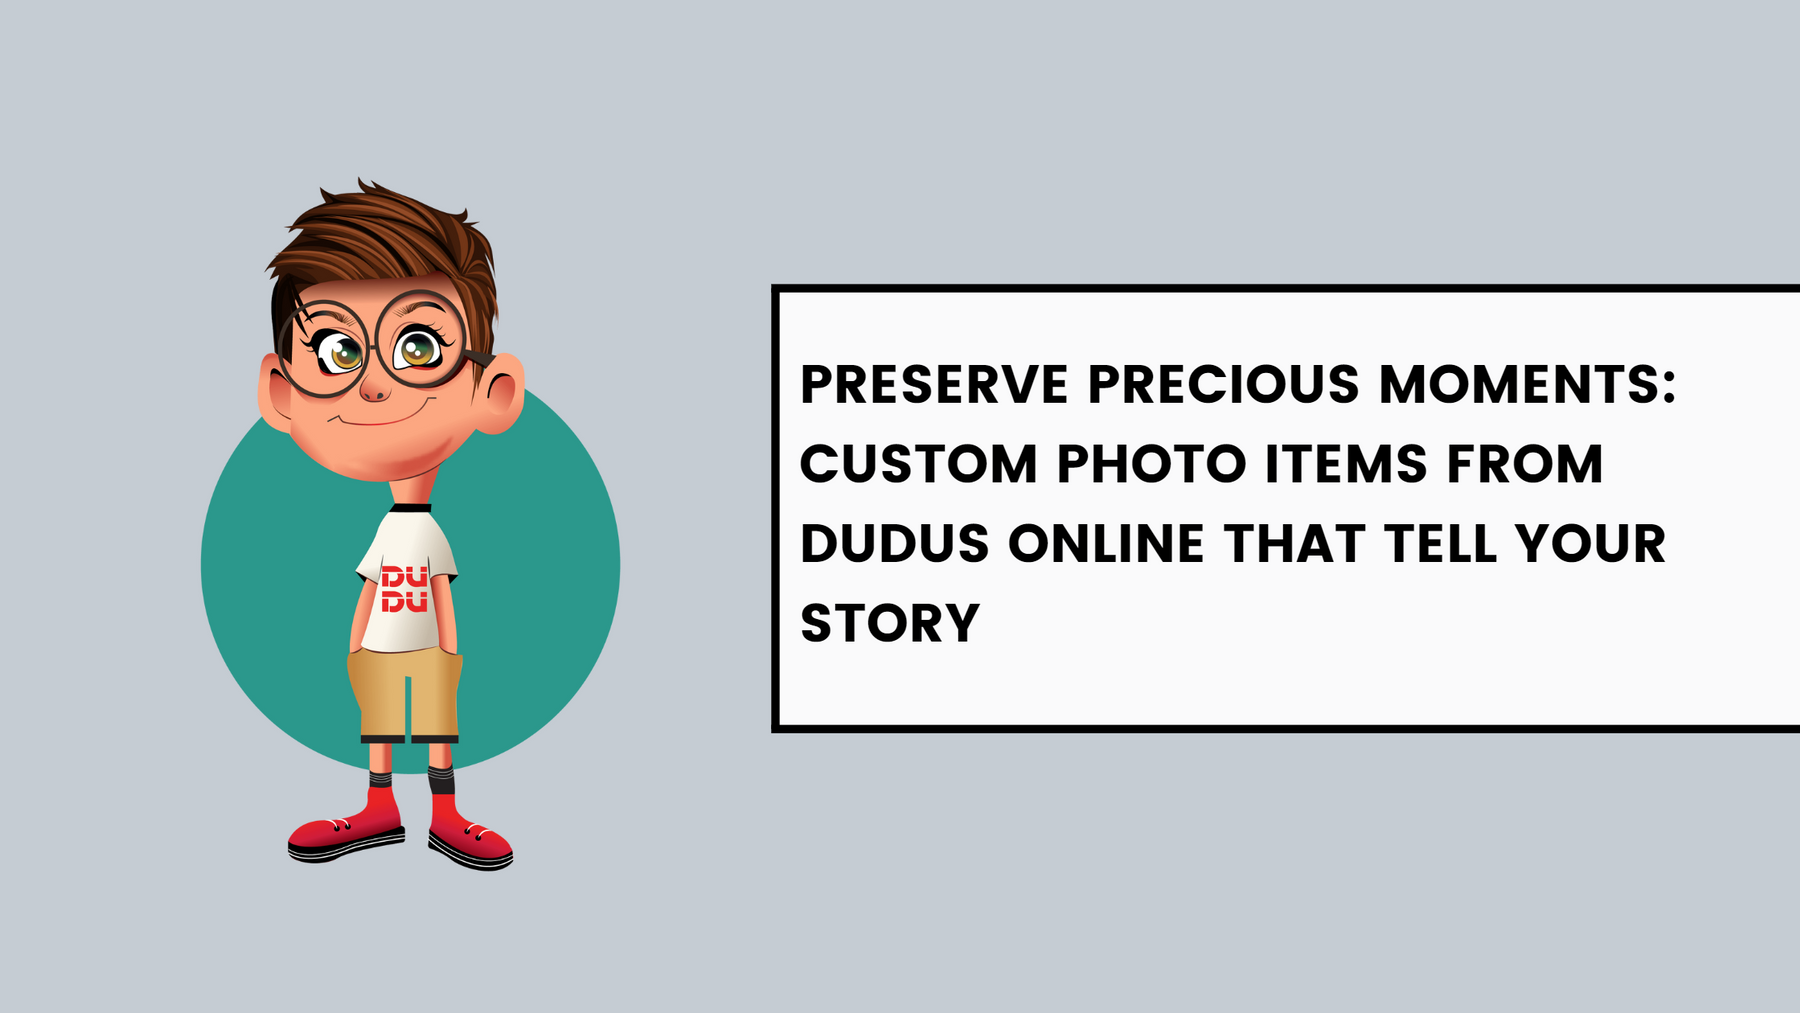 Preserve Precious Moments: Custom Photo Items From Dudus Online That Tell Your Story